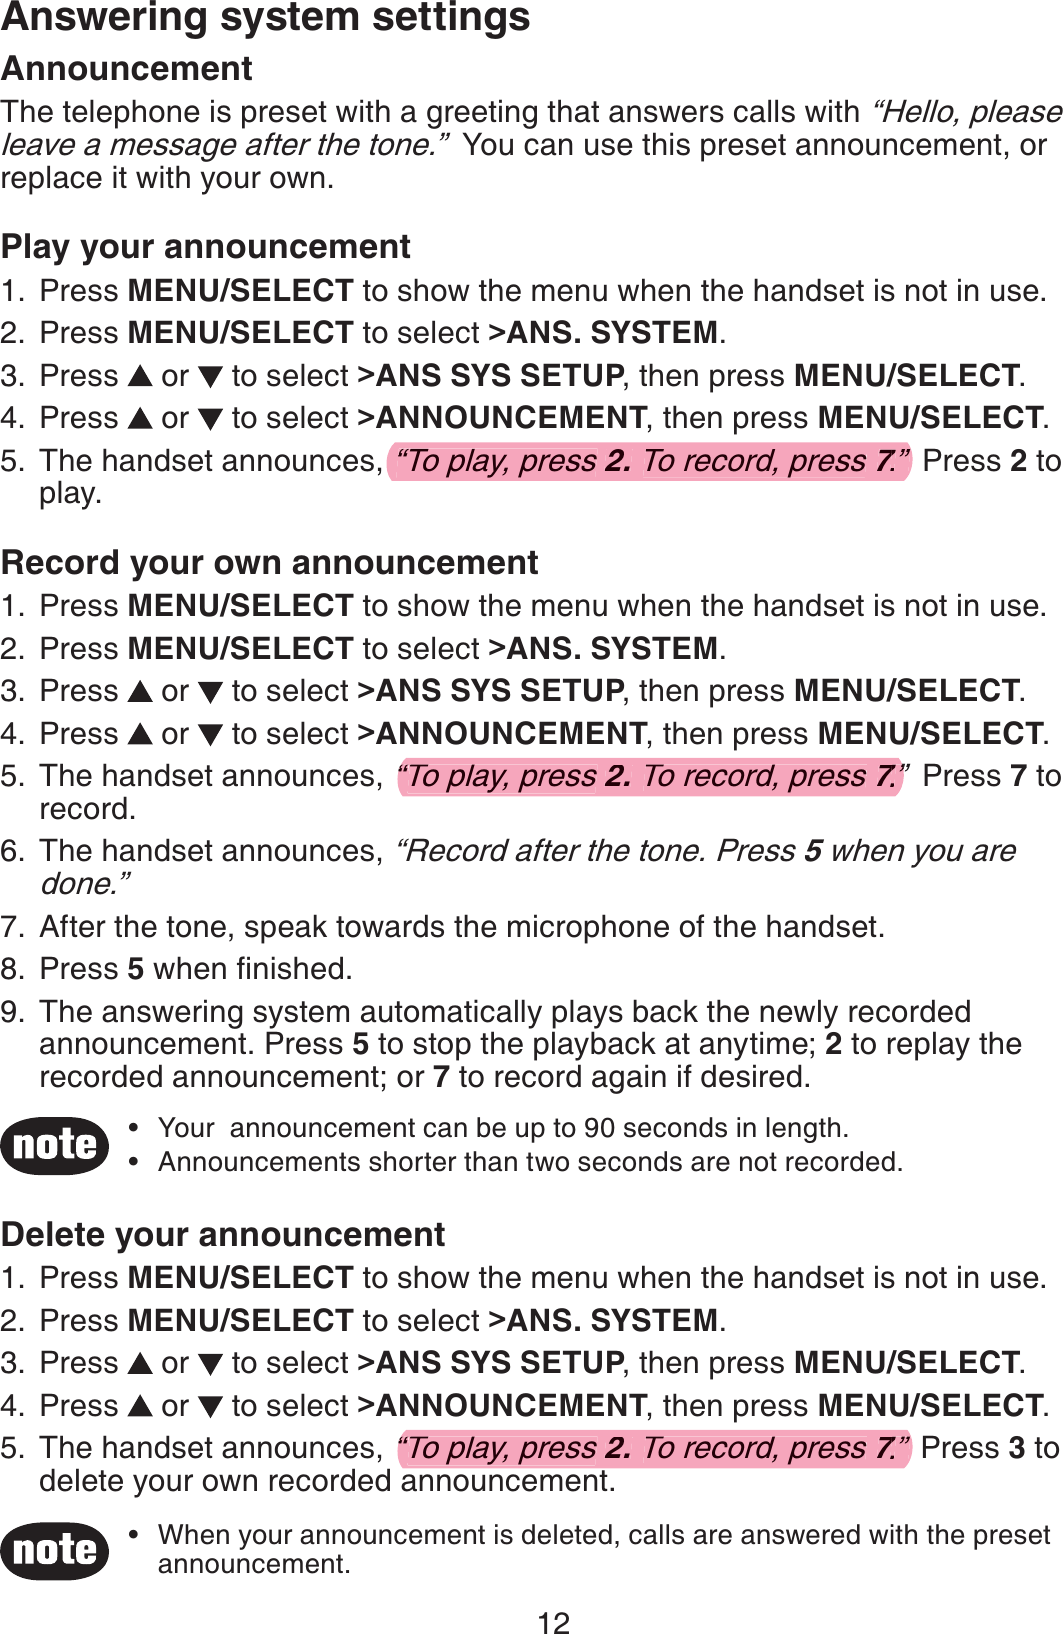 12Answering system settingsAnnouncementThe telephone is preset with a greeting that answers calls with “Hello, please leave a message after the tone.”  You can use this preset announcement, or replace it with your own. Play your announcement Press MENU/SELECT to show the menu when the handset is not in use.Press MENU/SELECT to select &gt;ANS. SYSTEM.Press   or   to select &gt;ANS SYS SETUP, then press MENU/SELECT.Press   or   to select &gt;ANNOUNCEMENT, then press MENU/SELECT.The handset announces, “To play, press 2. To record, press 7.”  Press 2 to play.Record your own announcement Press MENU/SELECT to show the menu when the handset is not in use.Press MENU/SELECT to select &gt;ANS. SYSTEM.Press   or   to select &gt;ANS SYS SETUP, then press MENU/SELECT.Press   or   to select &gt;ANNOUNCEMENT, then press MENU/SELECT.The handset announces, “To play, press 2. To record, press 7.”  Press 7 to record.The handset announces, “Record after the tone. Press 5 when you are done.”After the tone, speak towards the microphone of the handset.Press 5 when ﬁnished.The answering system automatically plays back the newly recorded announcement. Press 5 to stop the playback at anytime; 2 to replay the recorded announcement; or 7 to record again if desired.1.2.3.4.5.1.2.3.4.5.6.7.8.9.Your  announcement can be up to 90 seconds in length.Announcements shorter than two seconds are not recorded.••Delete your announcementPress MENU/SELECT to show the menu when the handset is not in use.Press MENU/SELECT to select &gt;ANS. SYSTEM.Press   or   to select &gt;ANS SYS SETUP, then press MENU/SELECT.Press   or   to select &gt;ANNOUNCEMENT, then press MENU/SELECT.The handset announces, “To play, press 2. To record, press 7.”  Press 3 to delete your own recorded announcement.1.2.3.4.5.When your announcement is deleted, calls are answered with the preset announcement.•“To play, press 2. To record, press 7.”77“To play, press 2.To record, press 7.”77“To play, press 2. To record, press 7.”77